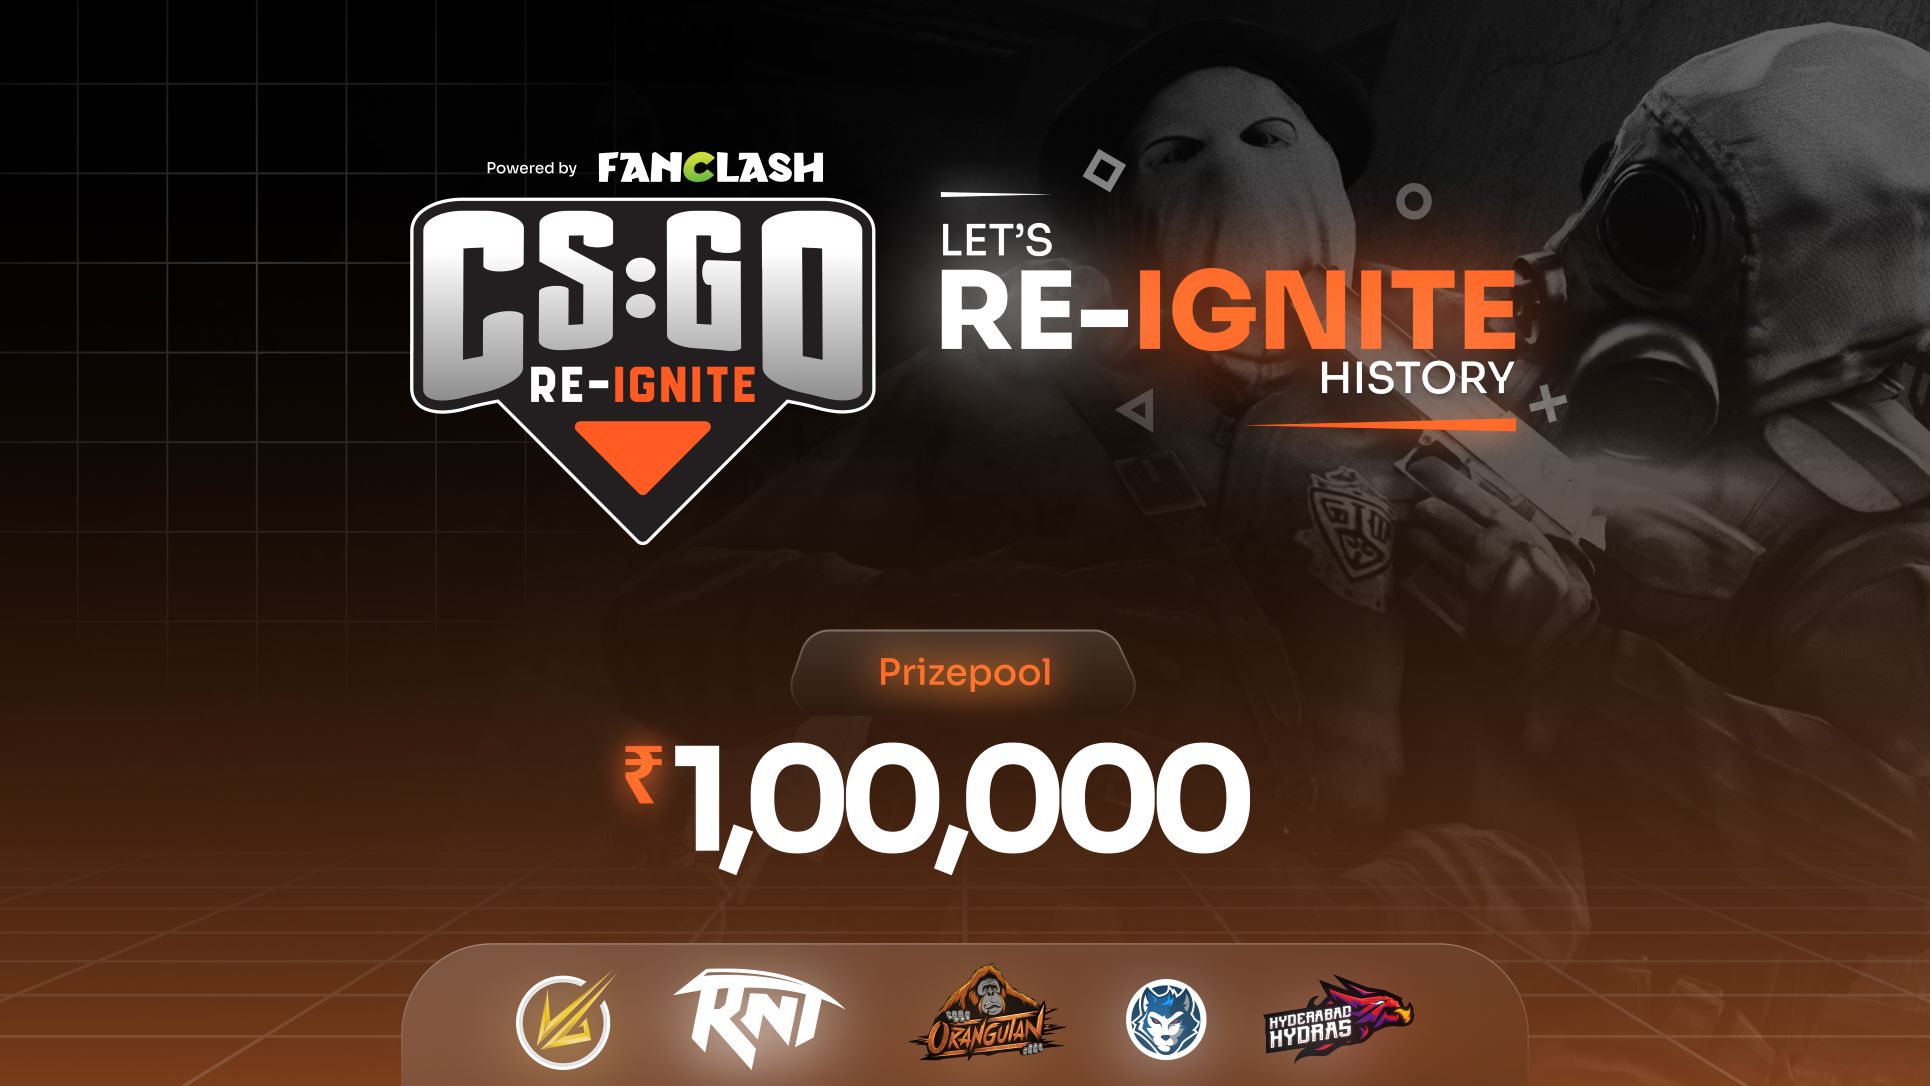 CSGO REIGNITE FanClash set to host CSGO Reignite with ₹1 lakh prize pool to revive the game